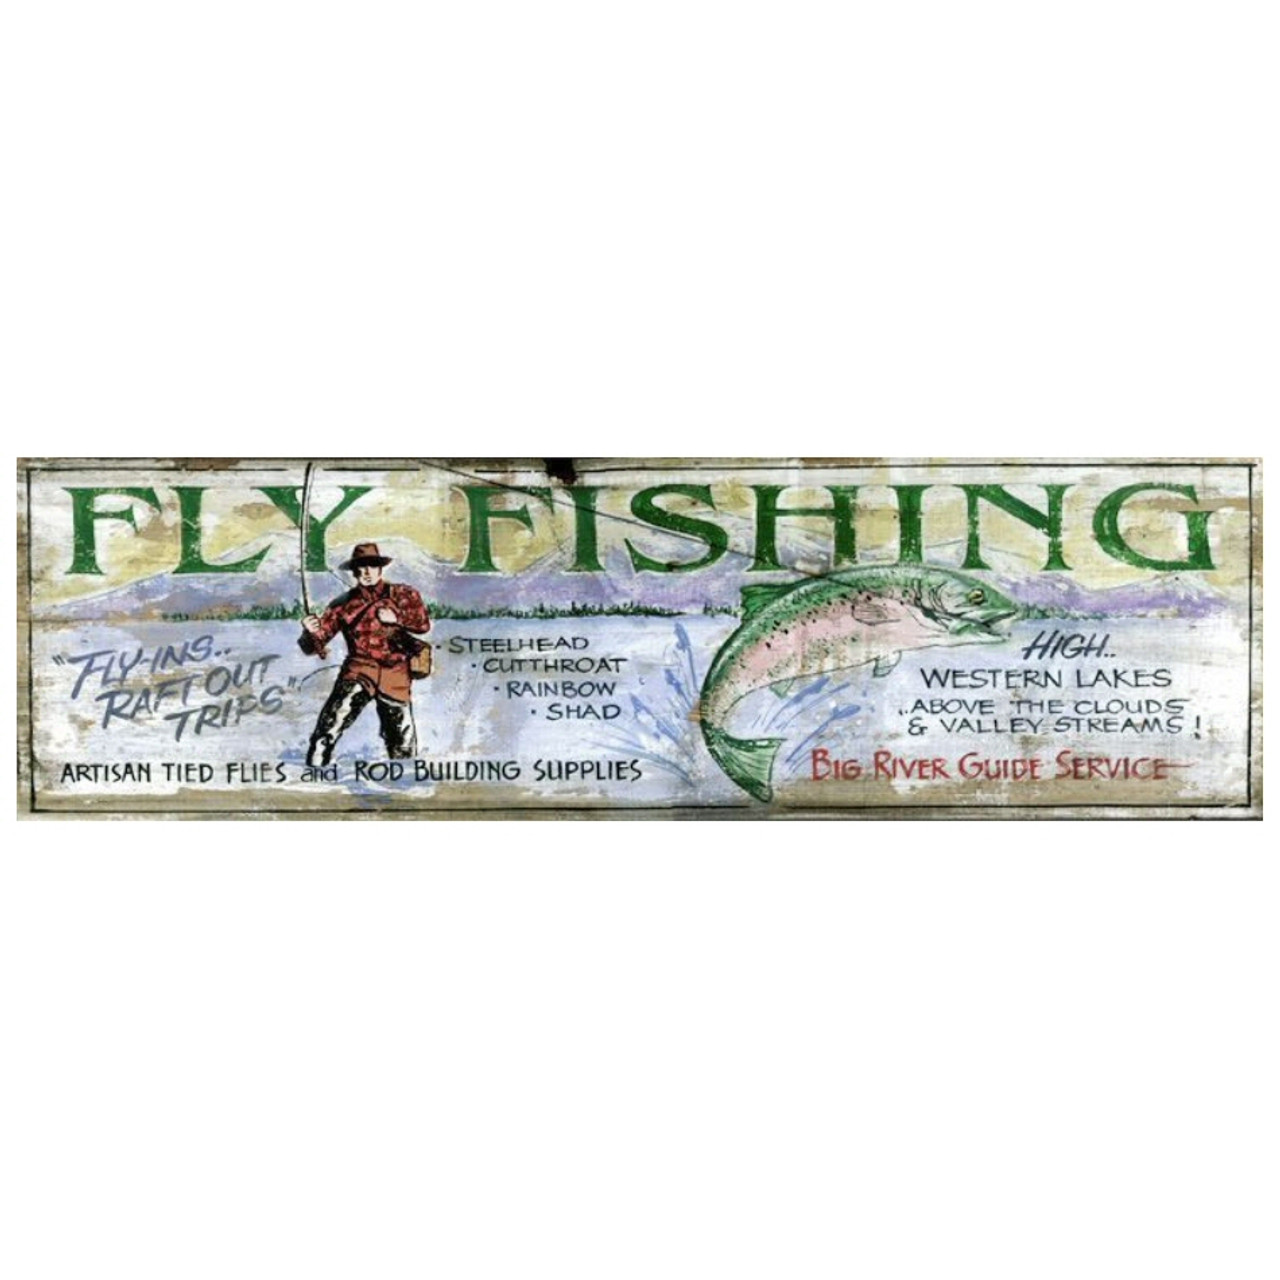 https://cdn11.bigcommerce.com/s-oo0gdojvjo/images/stencil/1280x1280/products/29039/38889/pp-m923-custom-big-river-fly-fishing-vintage-style-metal-sign-red-horse-signs__96676.1620475427.jpg?c=2&imbypass=on